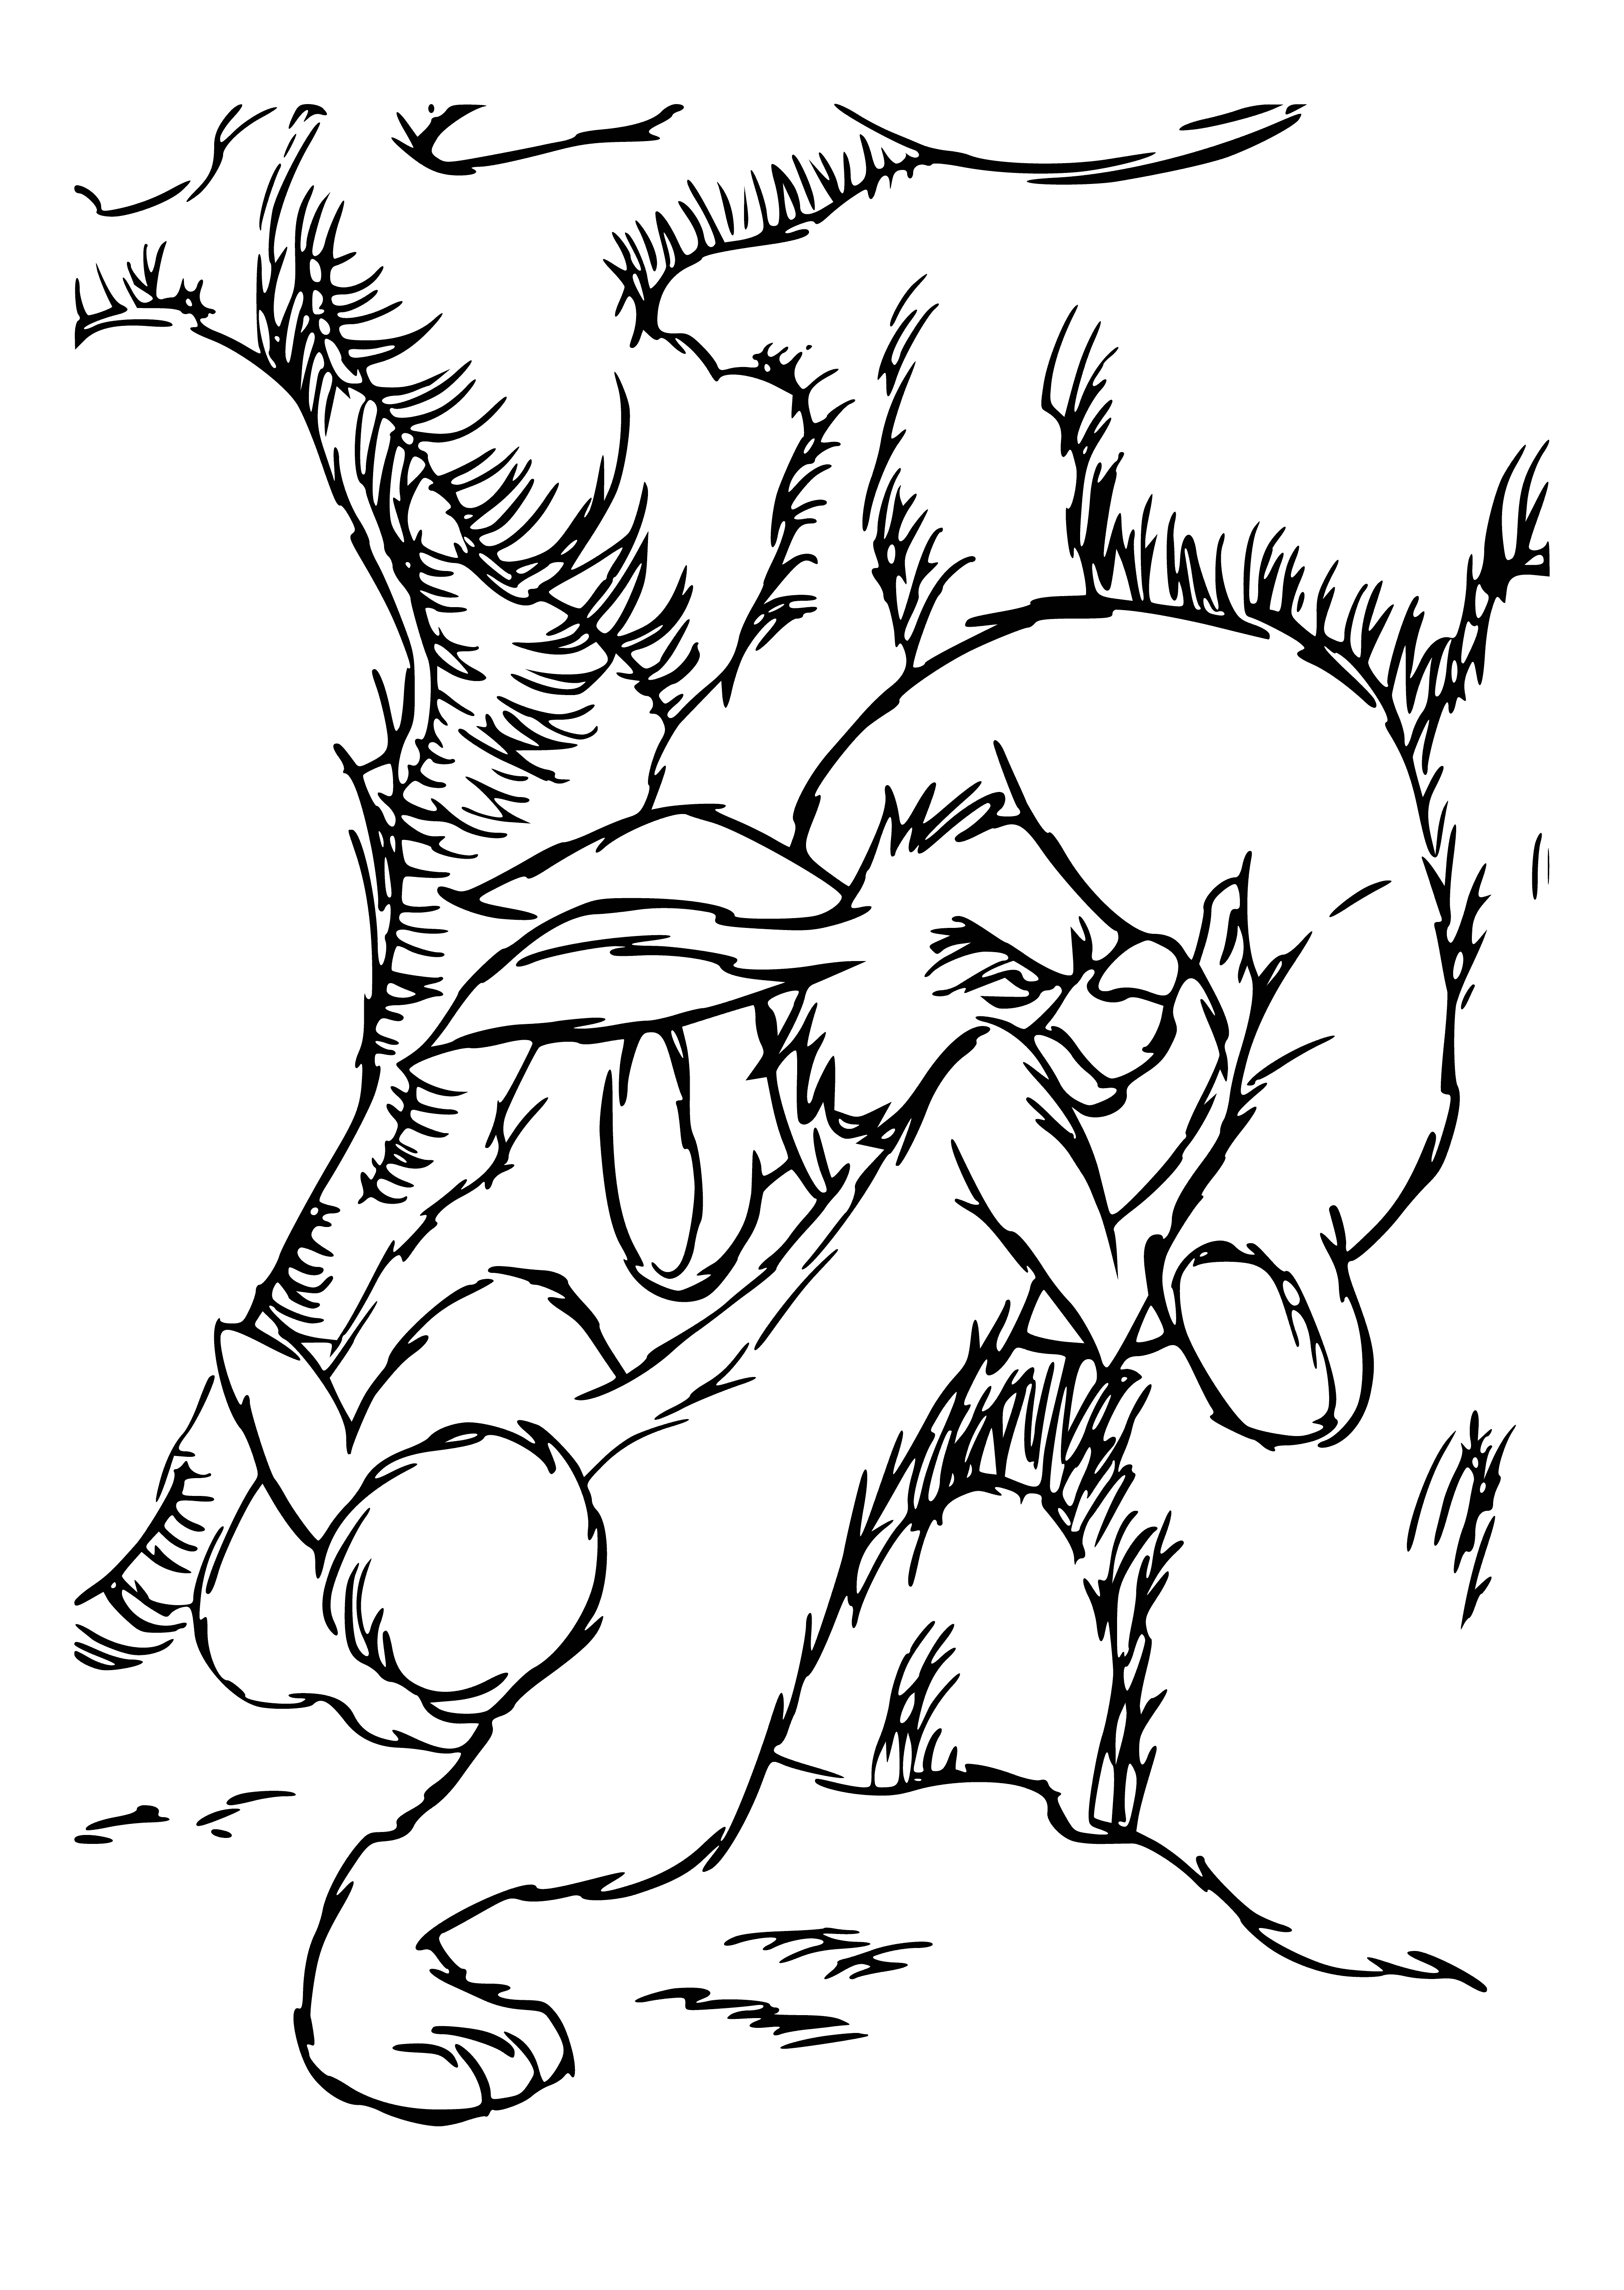 Winnie stuck coloring page